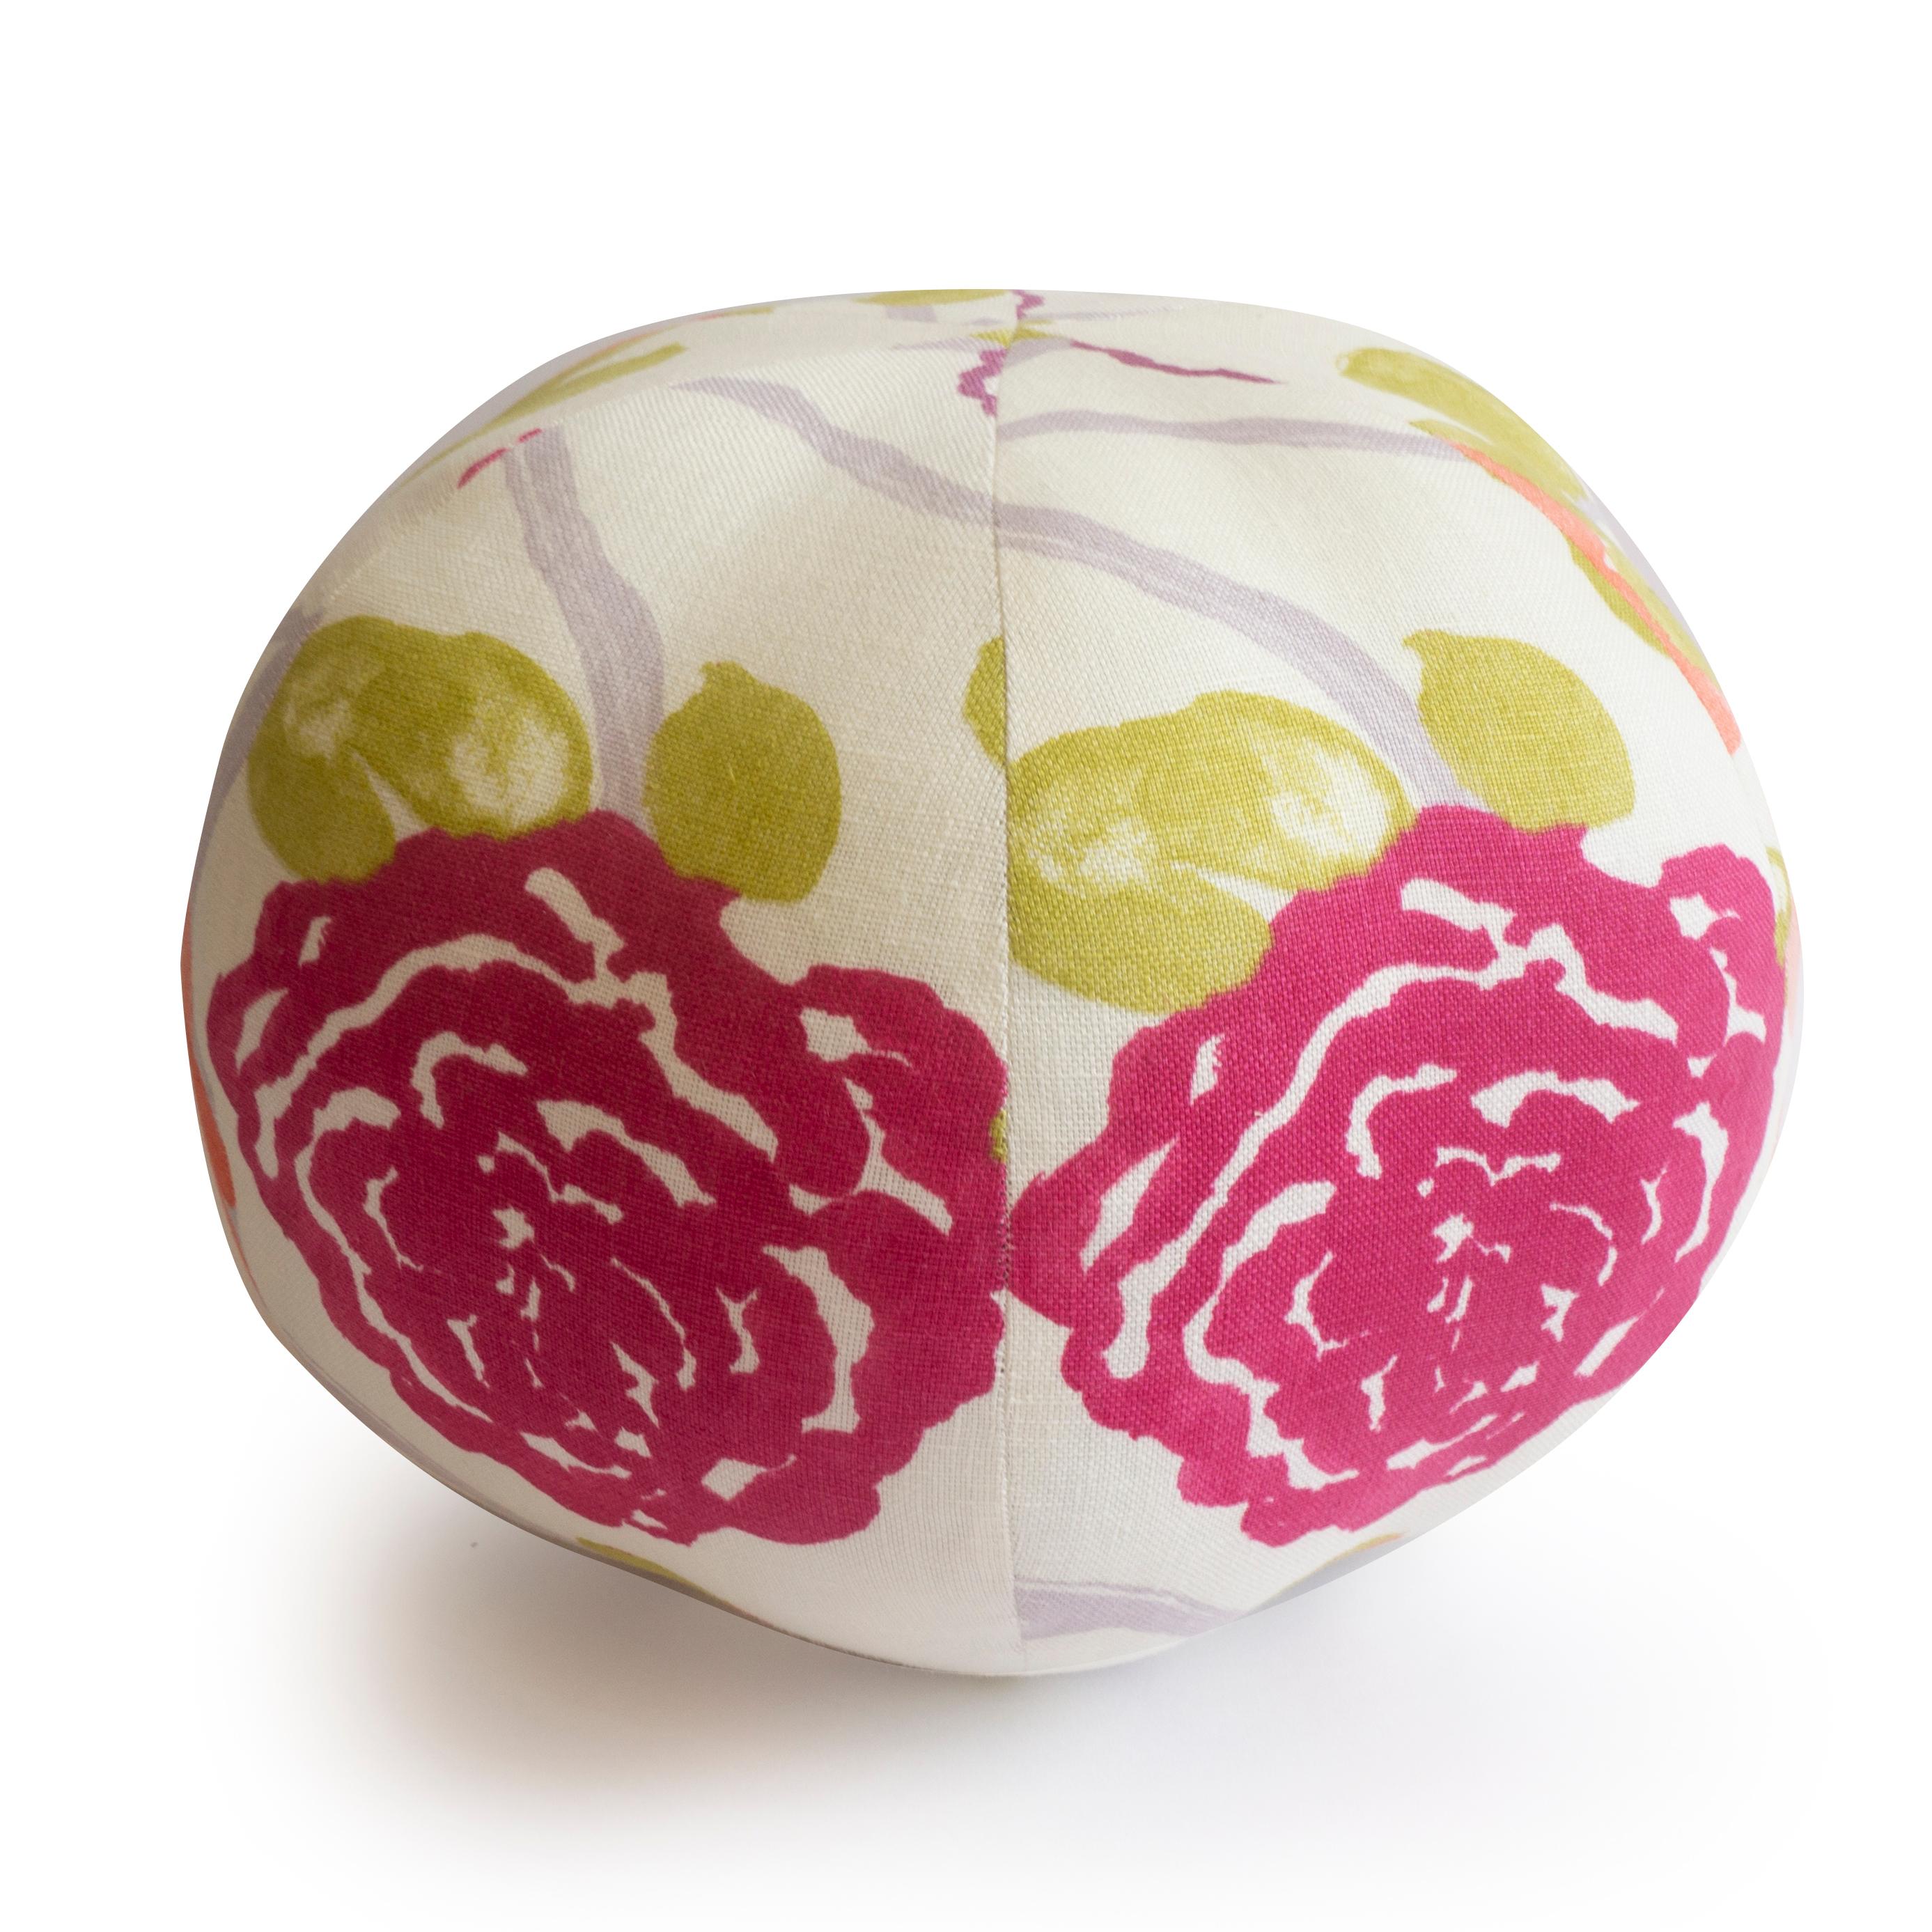 This is a hand sewn round ball pillow in a watercolor rose print. All pillows are made at our studio in Norwalk, Connecticut. 

Measurements: 9